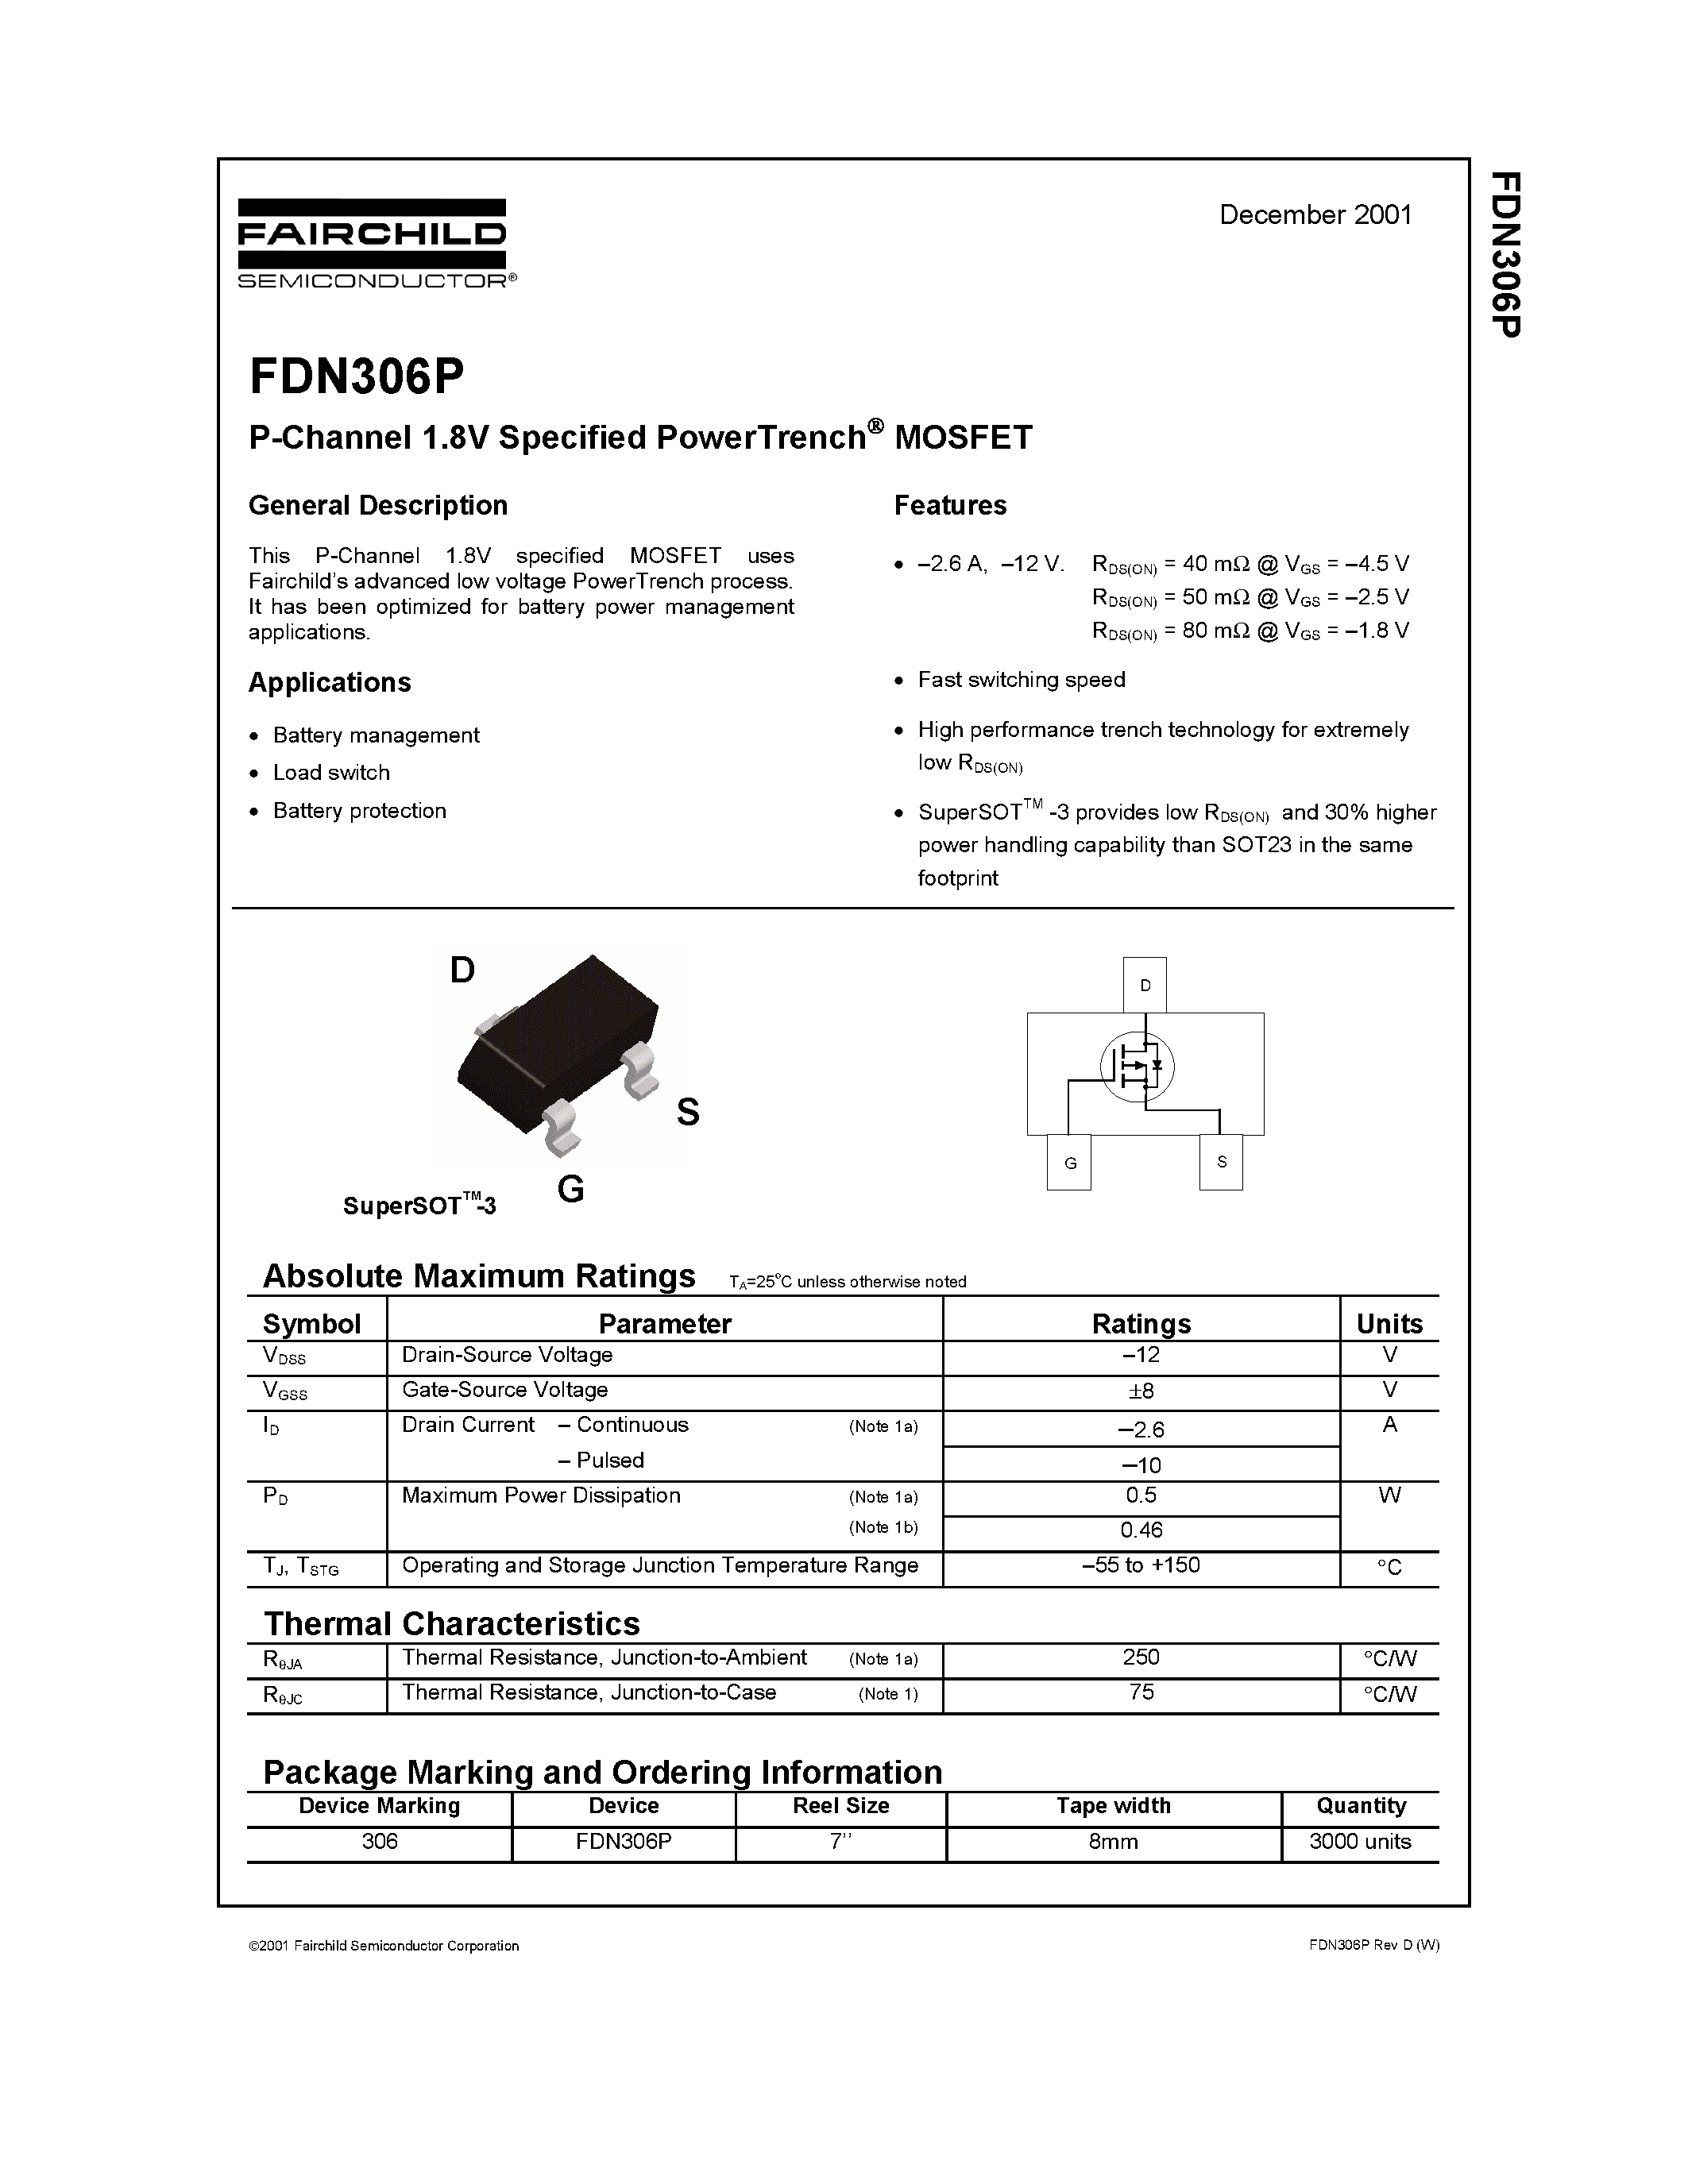 Даташит FDN306P - P-Channel 1.8V Specified PowerTrench MOSFET страница 1